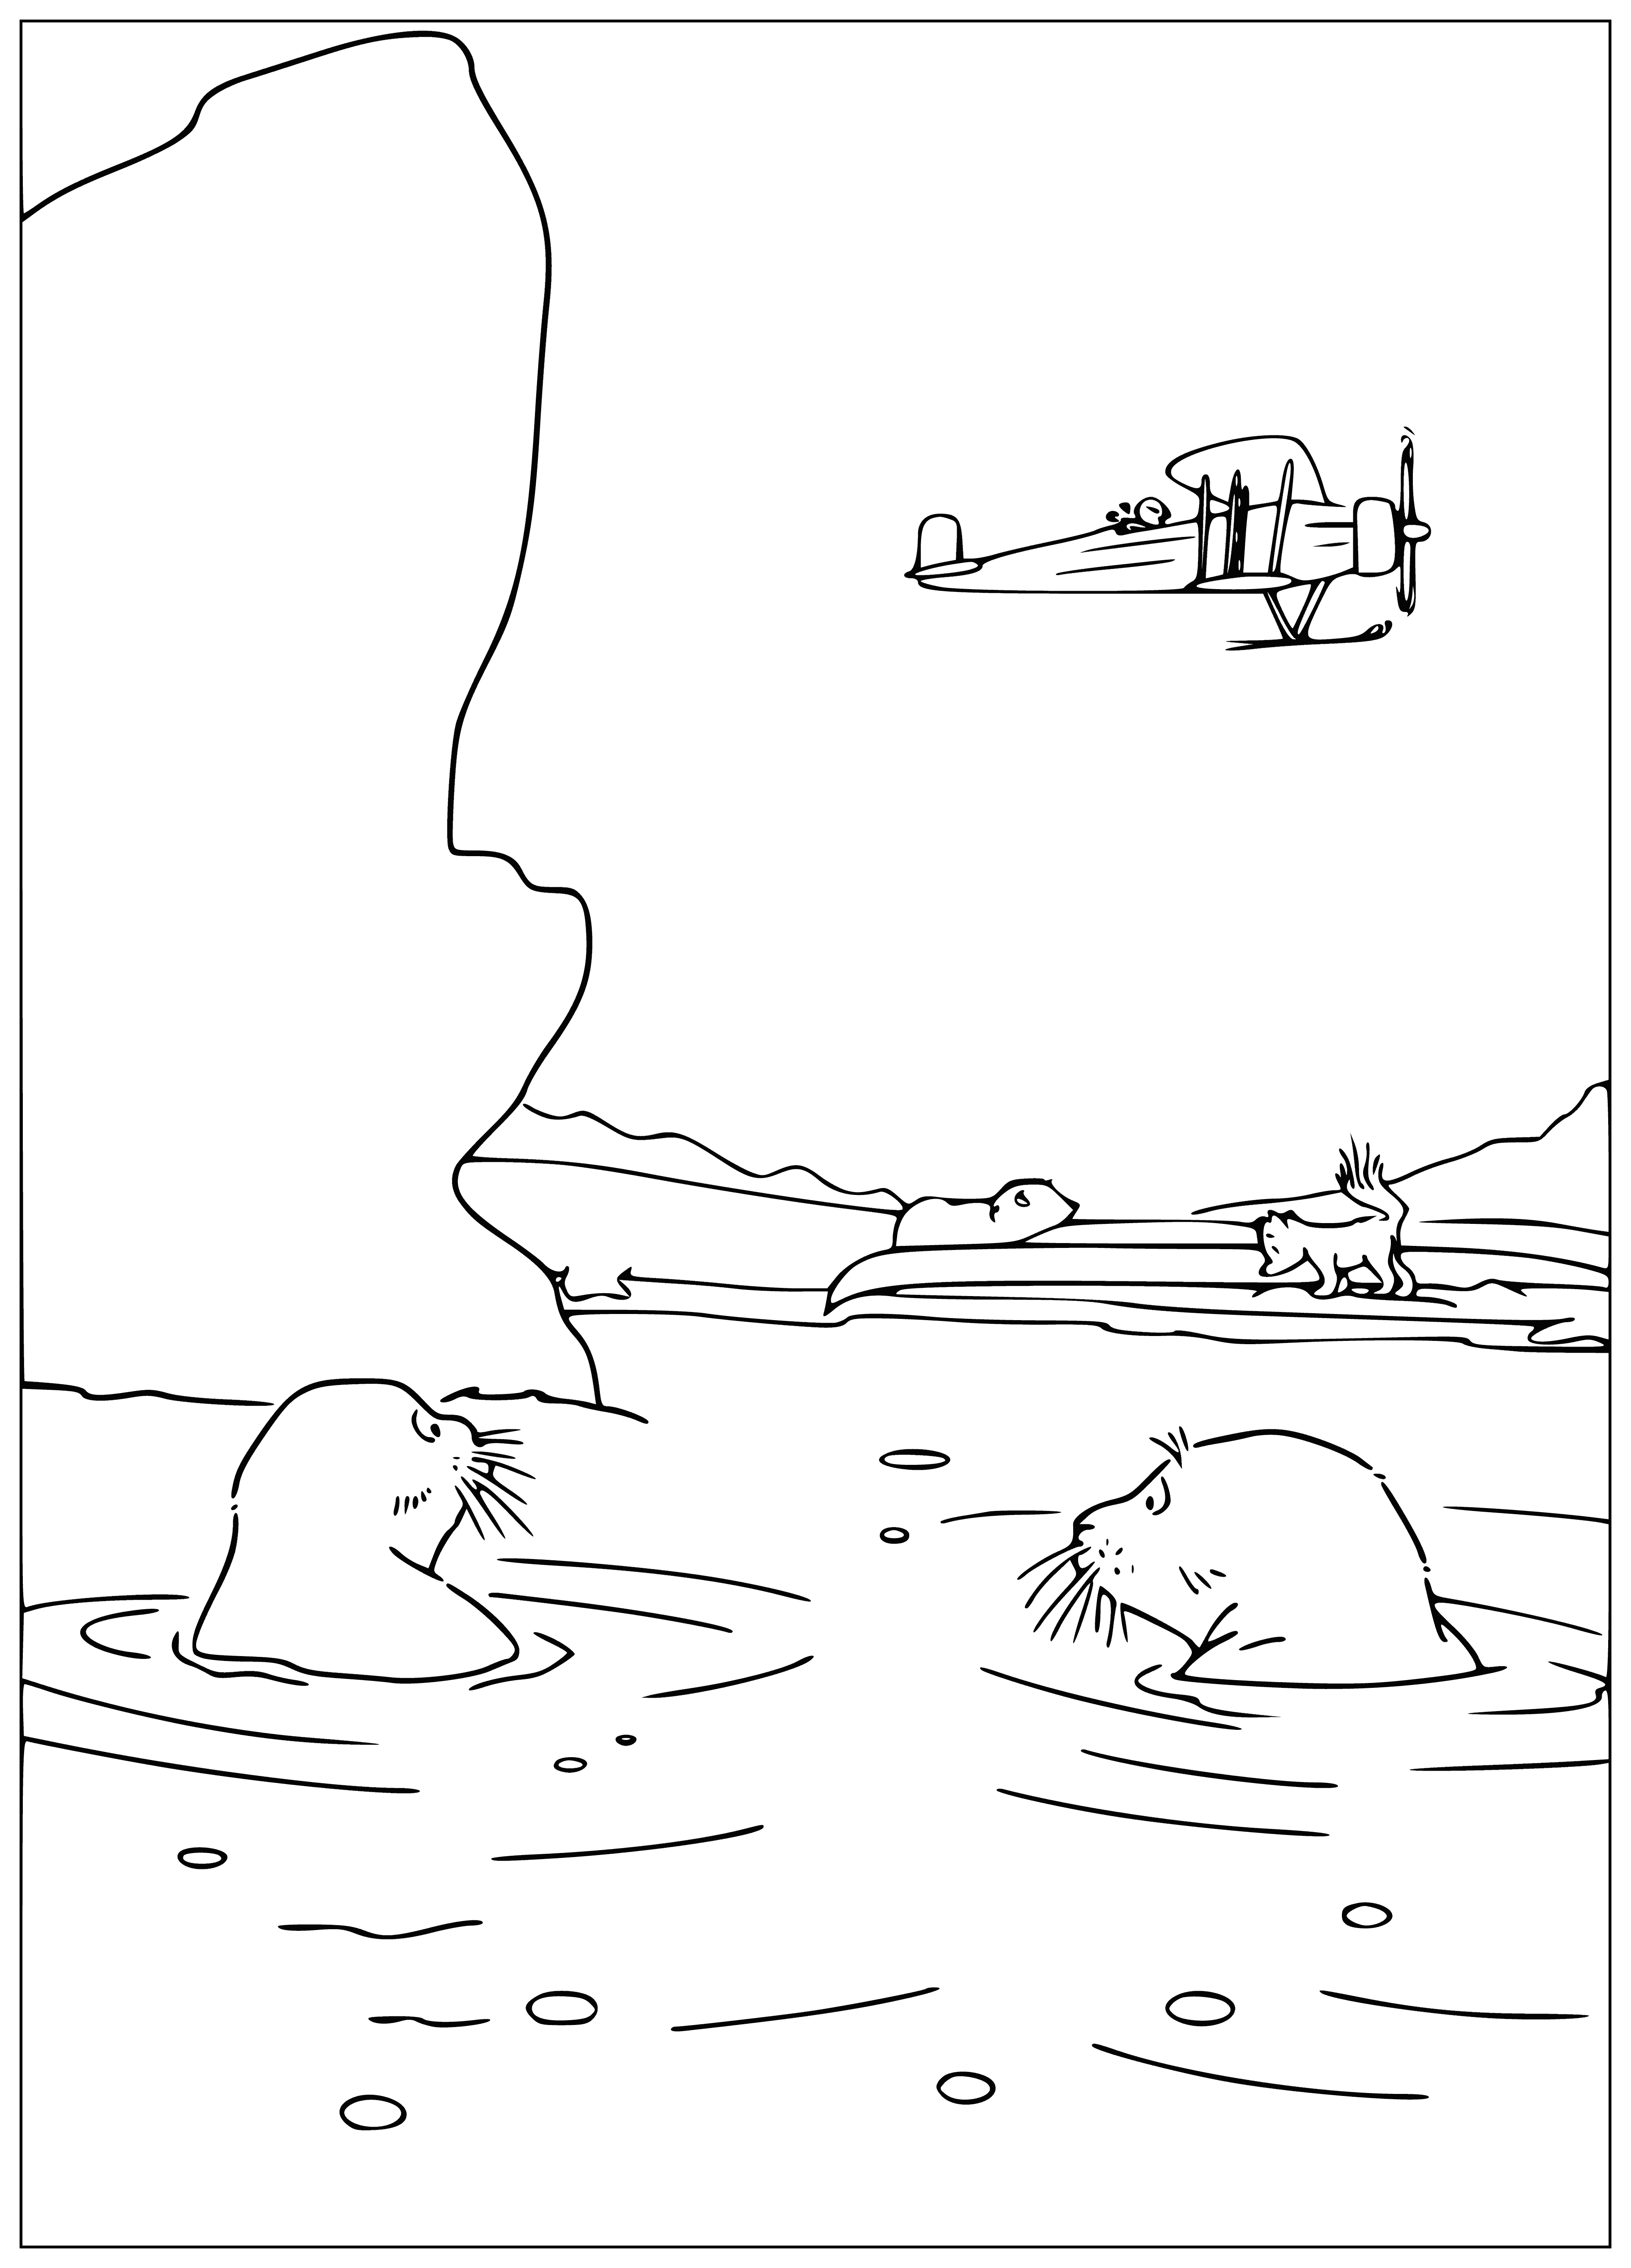 coloring page: Small polar bear flying in an airplane, looking out the window at icebergs in a body of water.